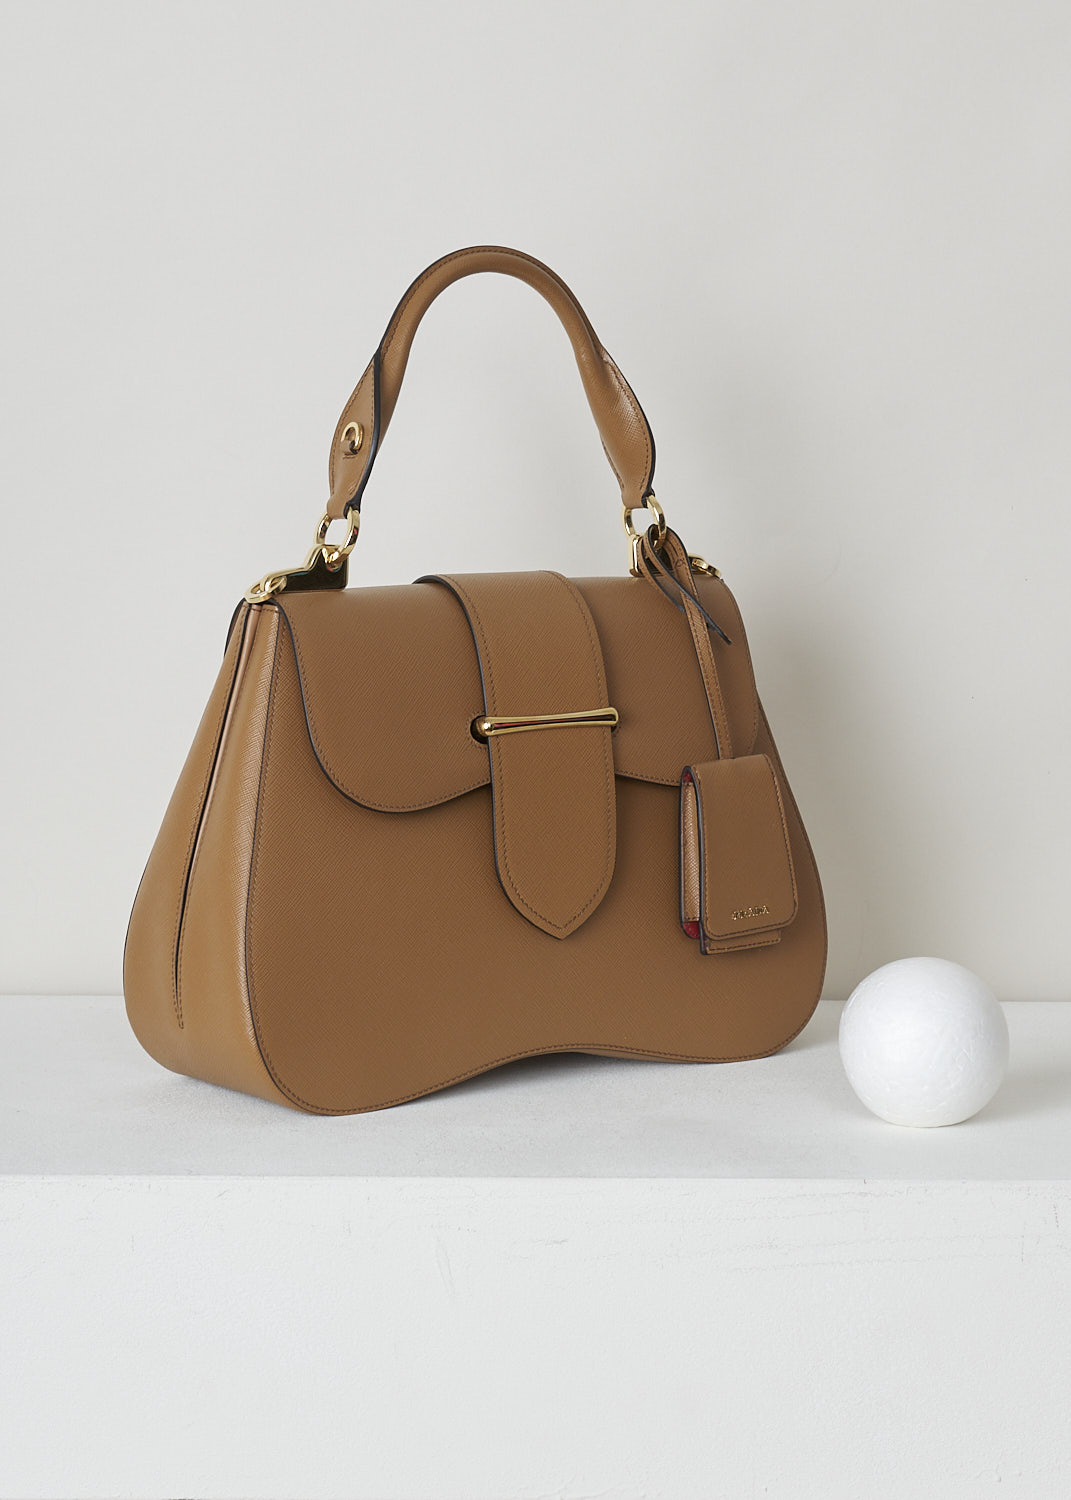 PRADA, CARAMEL BROWN SIDONIE TOP HANDLE BAG, CARTELLA_1BN002_F098L_CARAMEL, Brown, Side, This large caramel brown Sidonie Top Handle Bag is made with Saffiano leather. The bag comes with a leather handle and an adjustable and detachable shoulder strap. The bag has gold-tone metal hardware with the brand's logo on the back. The removable leather keychain has that same gold-tone logo on it. The slip-through closure opens up to reveal its red interior. The bag has a single, spacious compartment with a zipped inner pocket to one side and a patch pocket on the other side.   
